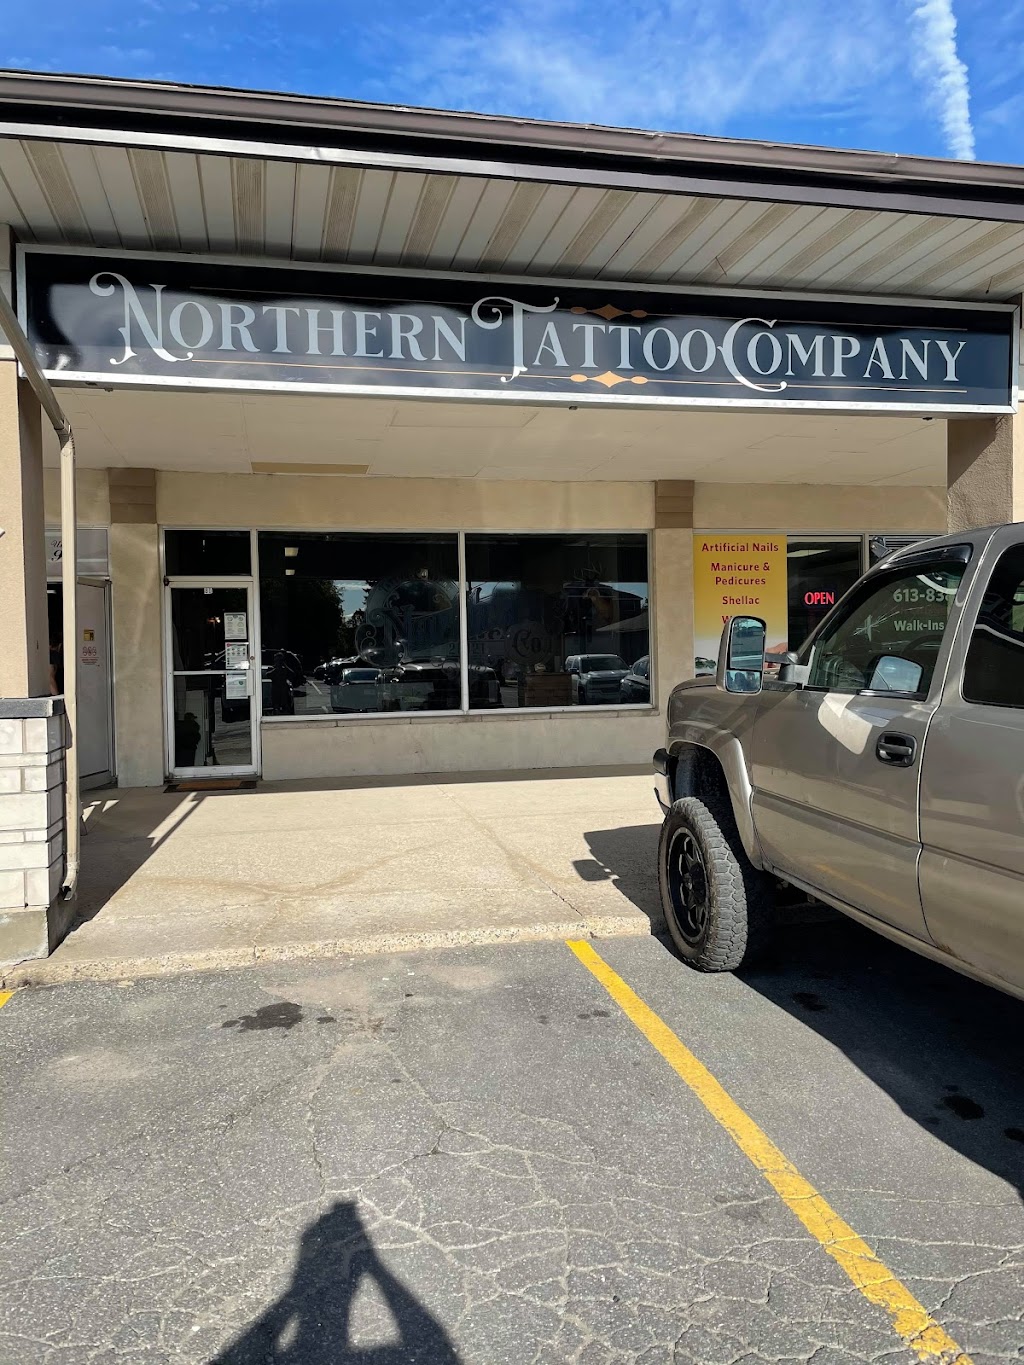 Northern Tattoo Company | store | 6179 Perth St, Richmond, ON K0A 2Z0, Canada | 6132635923 OR +1 613-263-5923